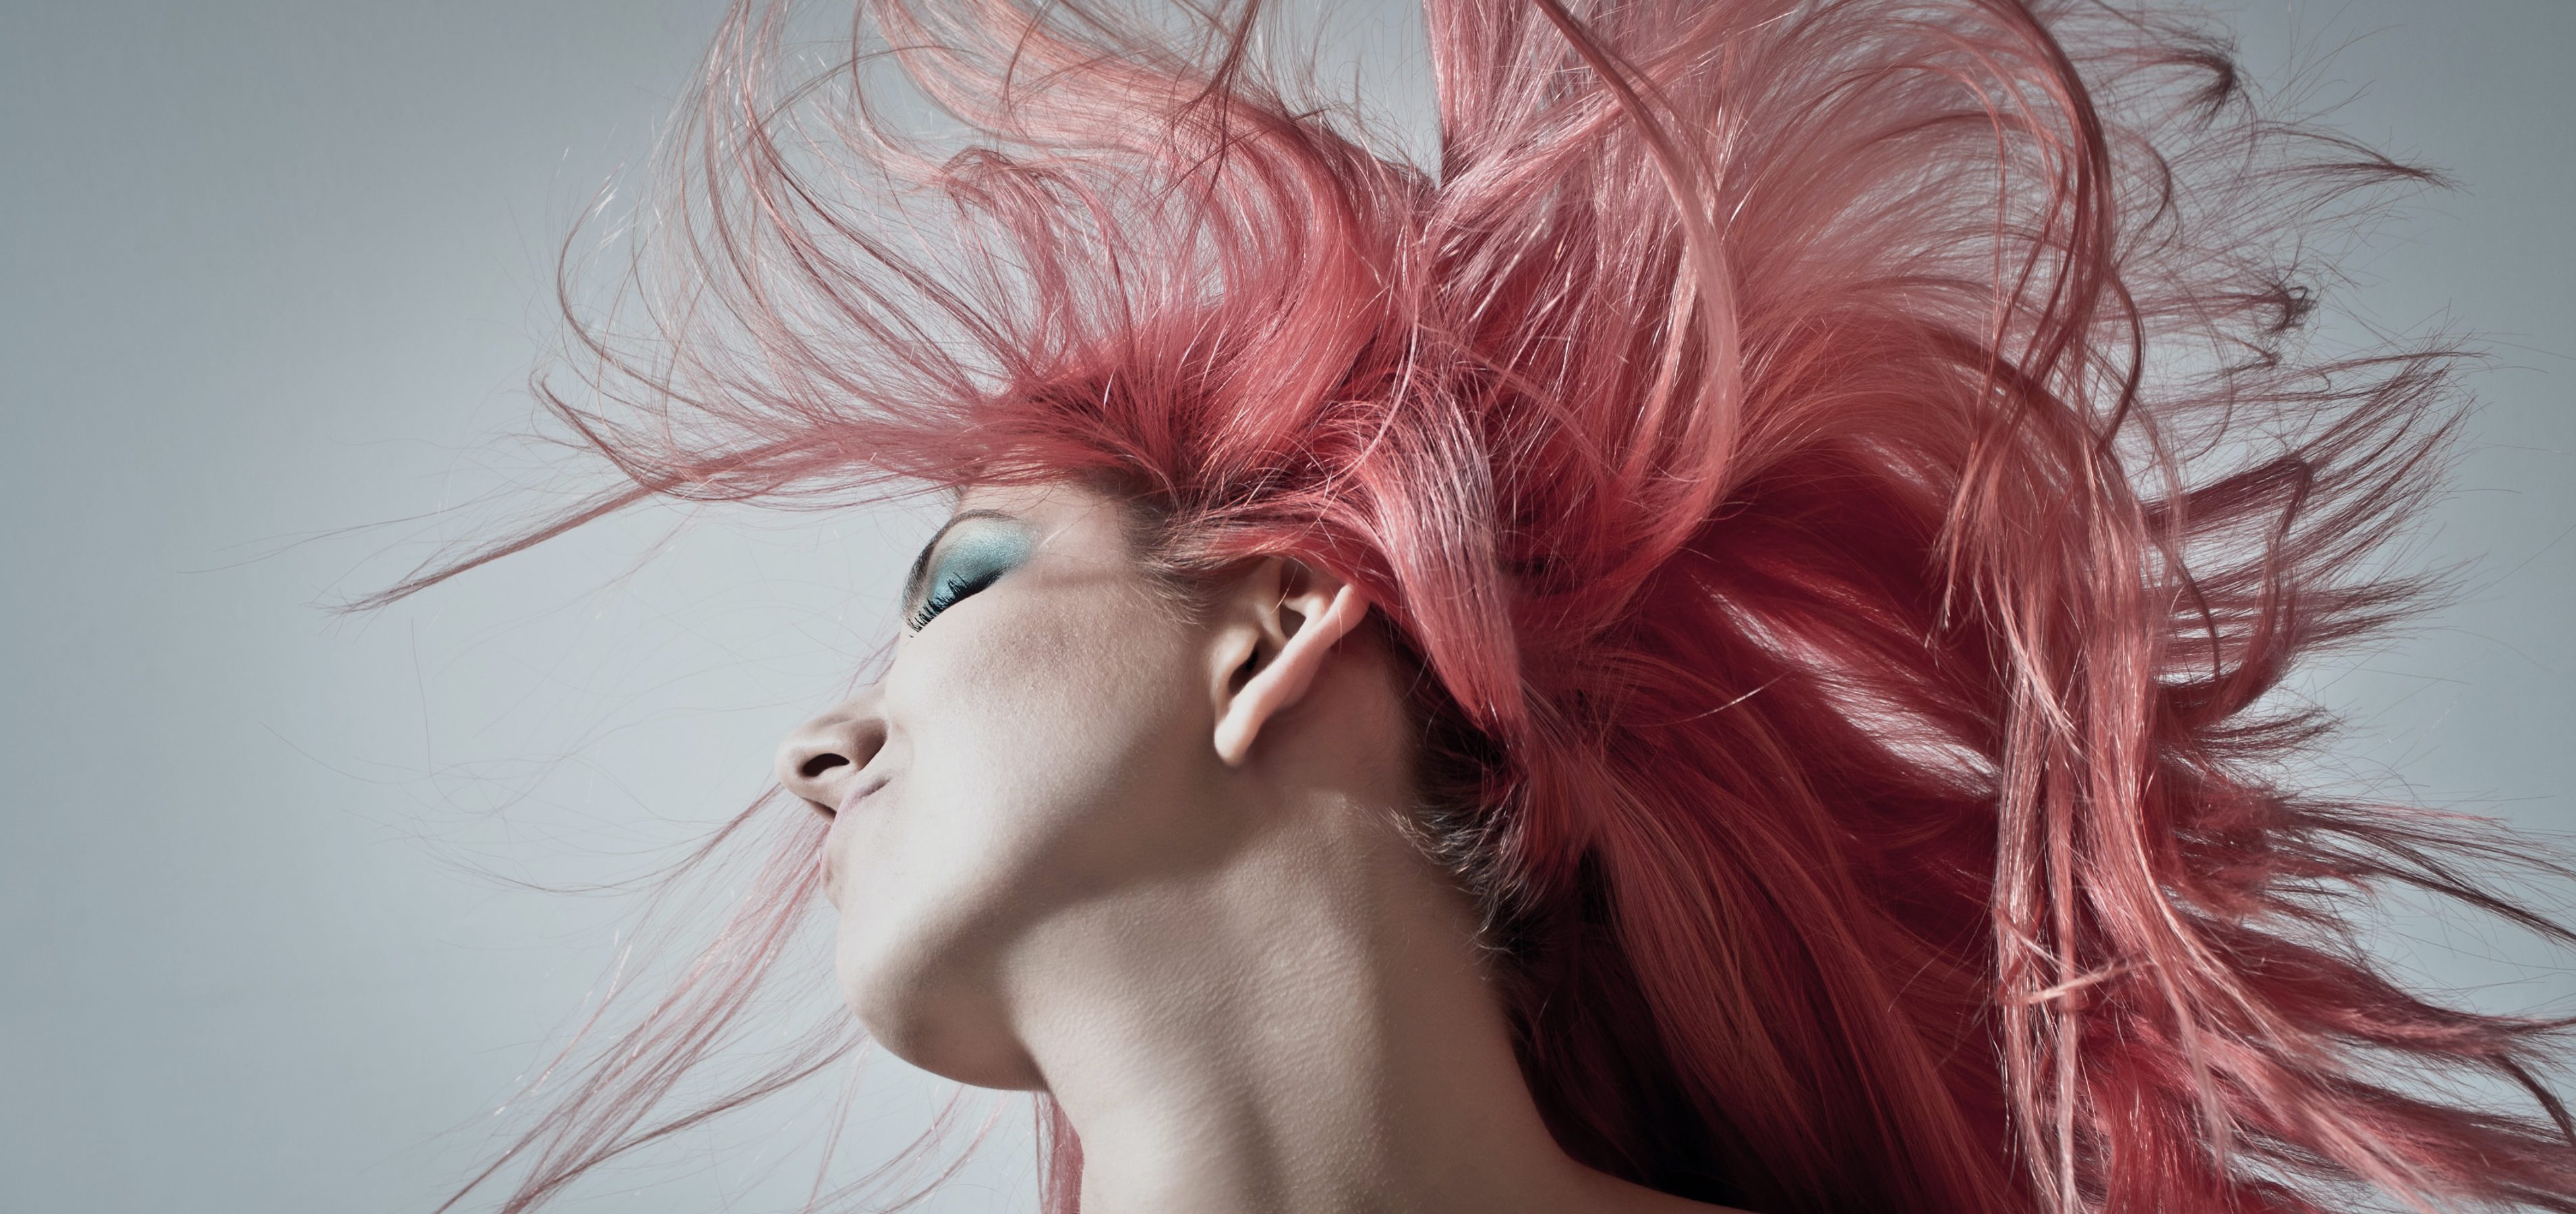 Woman with pink hair dancing